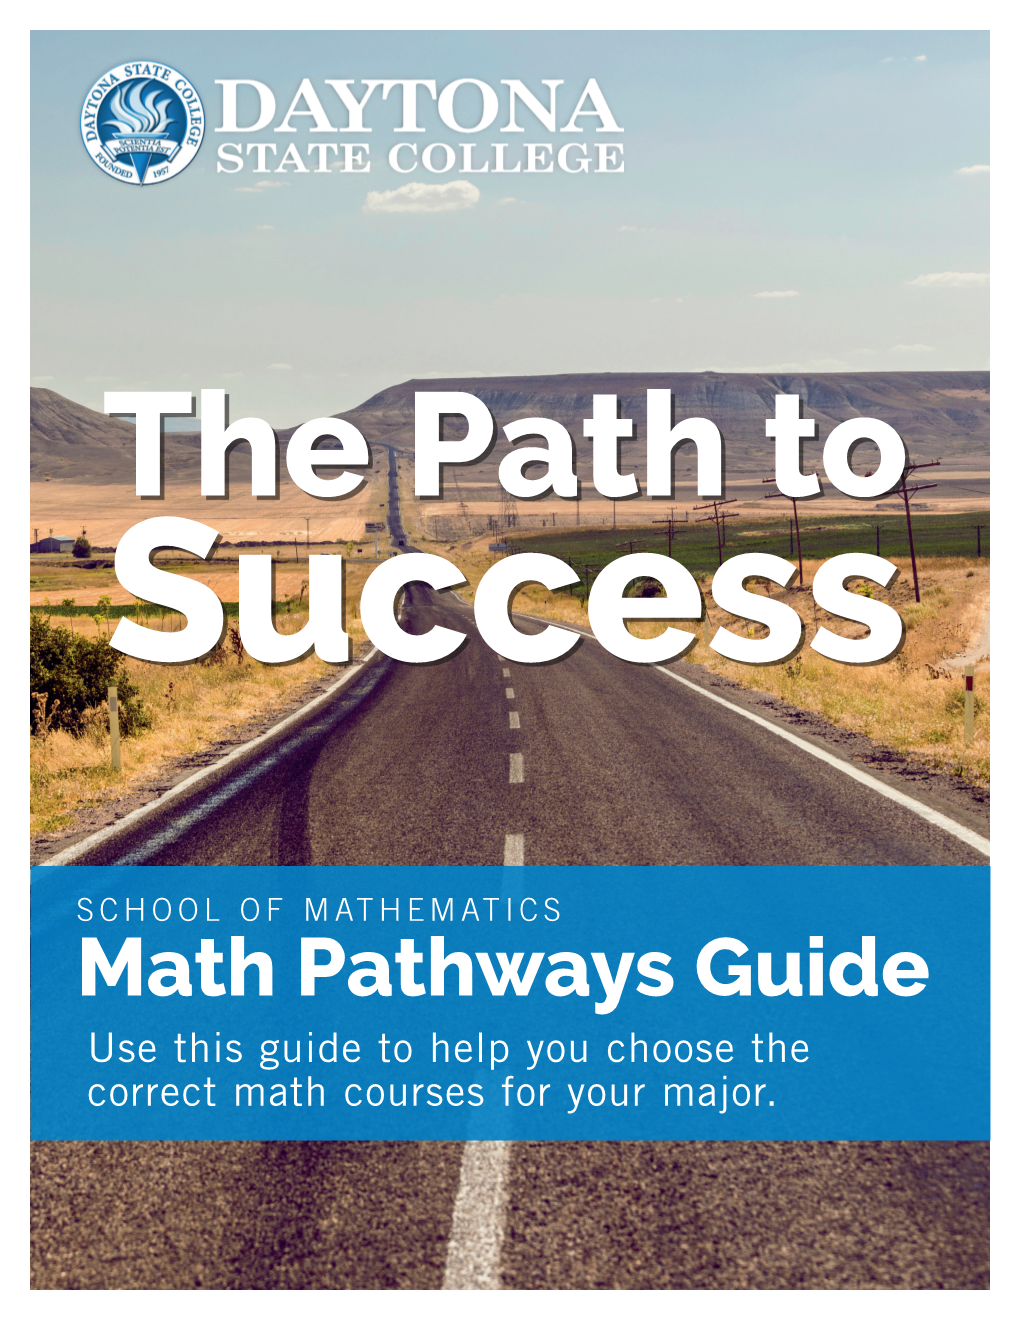 Math Pathways Guide Use This Guide to Help You Choose the Correct Math Courses for Your Major